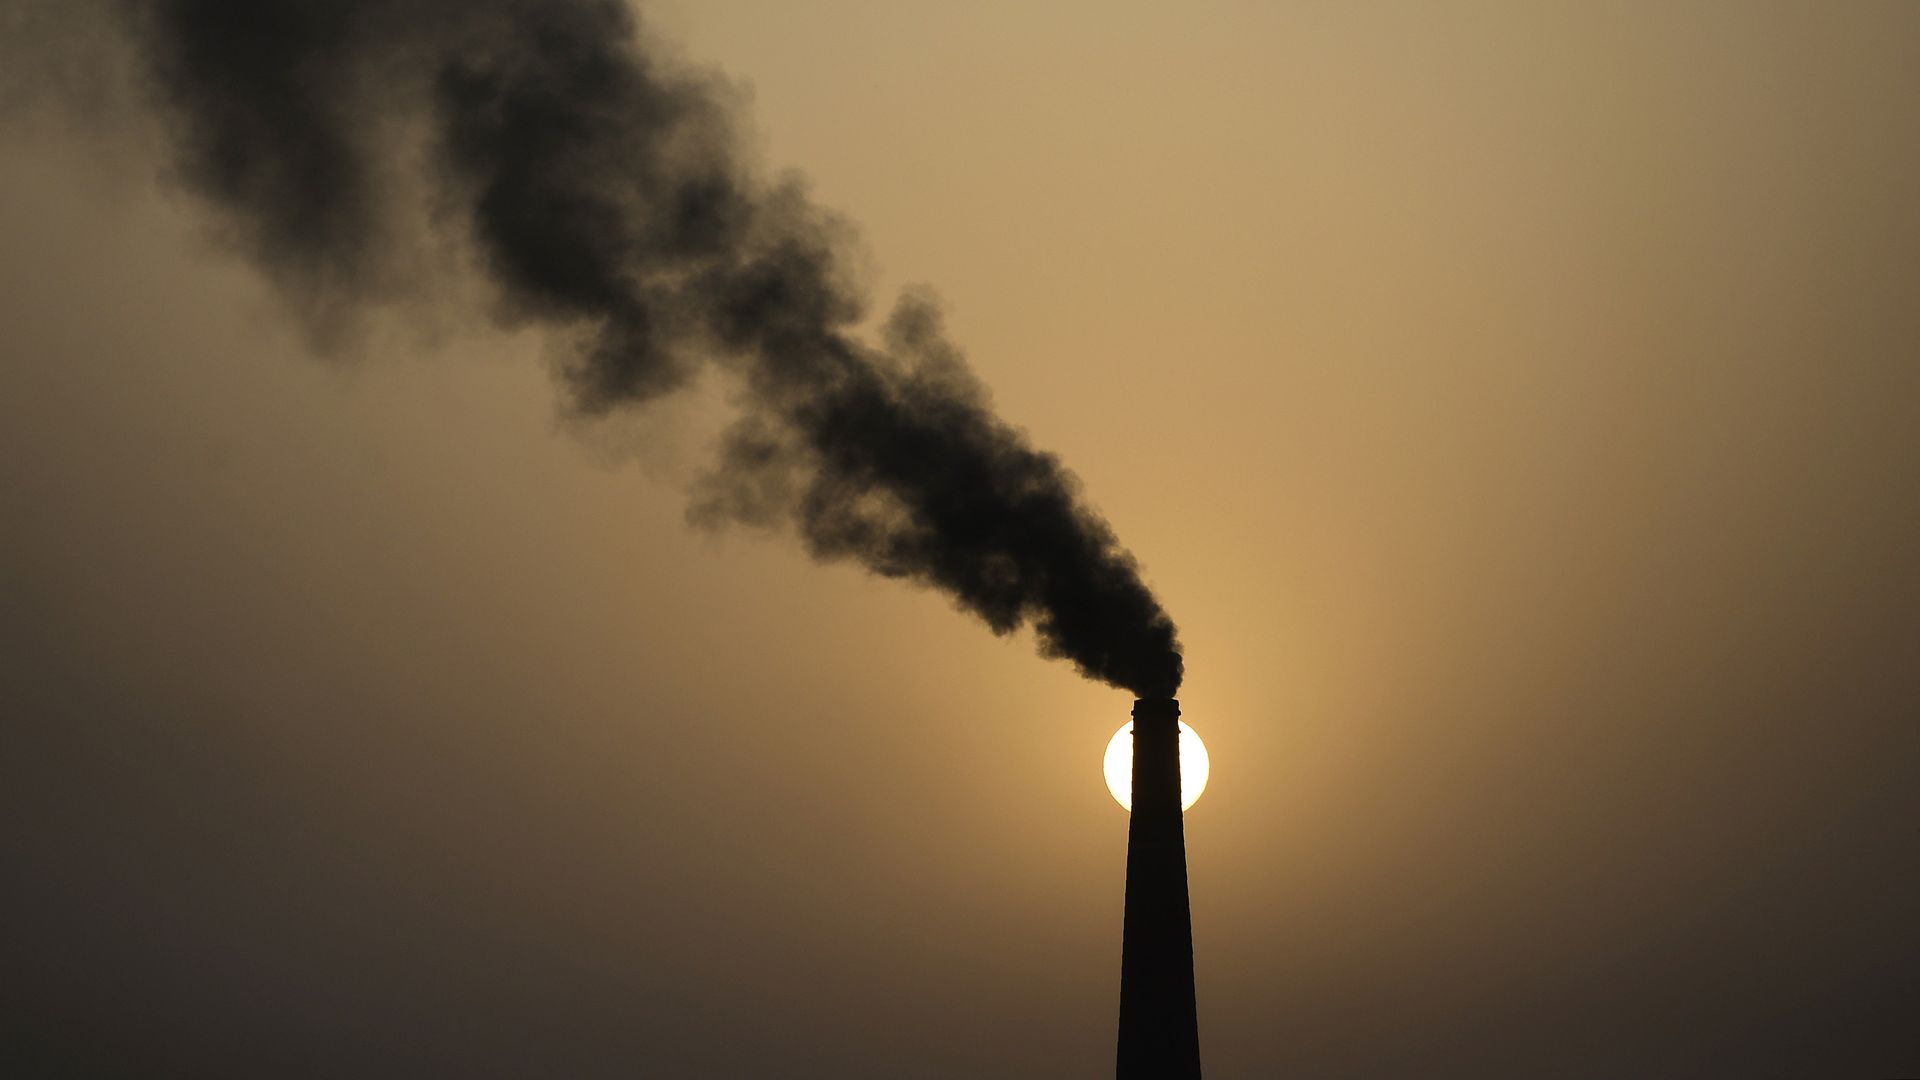 A chimney of a brick factory emits smoke during sunset in Jalandhar on May 31, 2018.